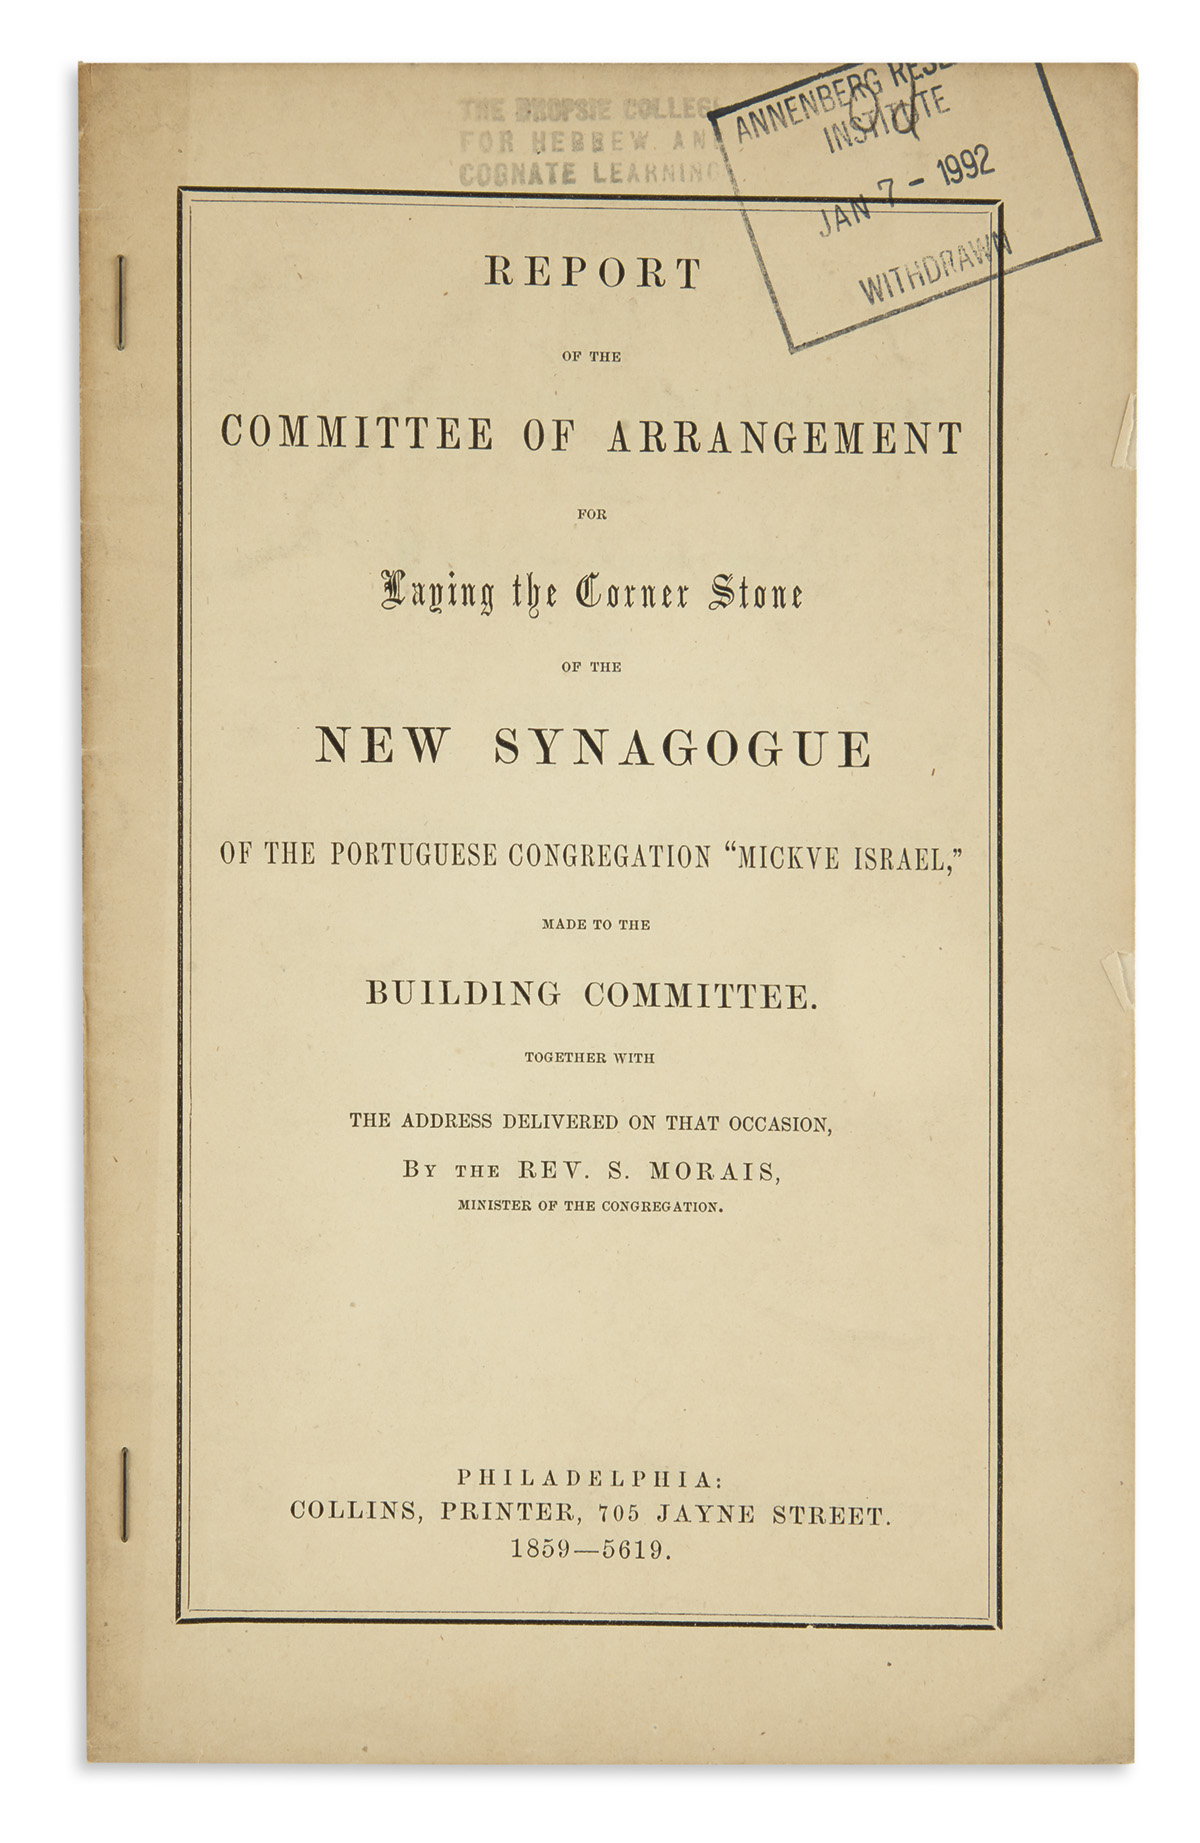 (JUDAICA.) Report of the Committee of Arrangement for Laying the Corner Stone of the New Synagogue of the Portuguese Congregation